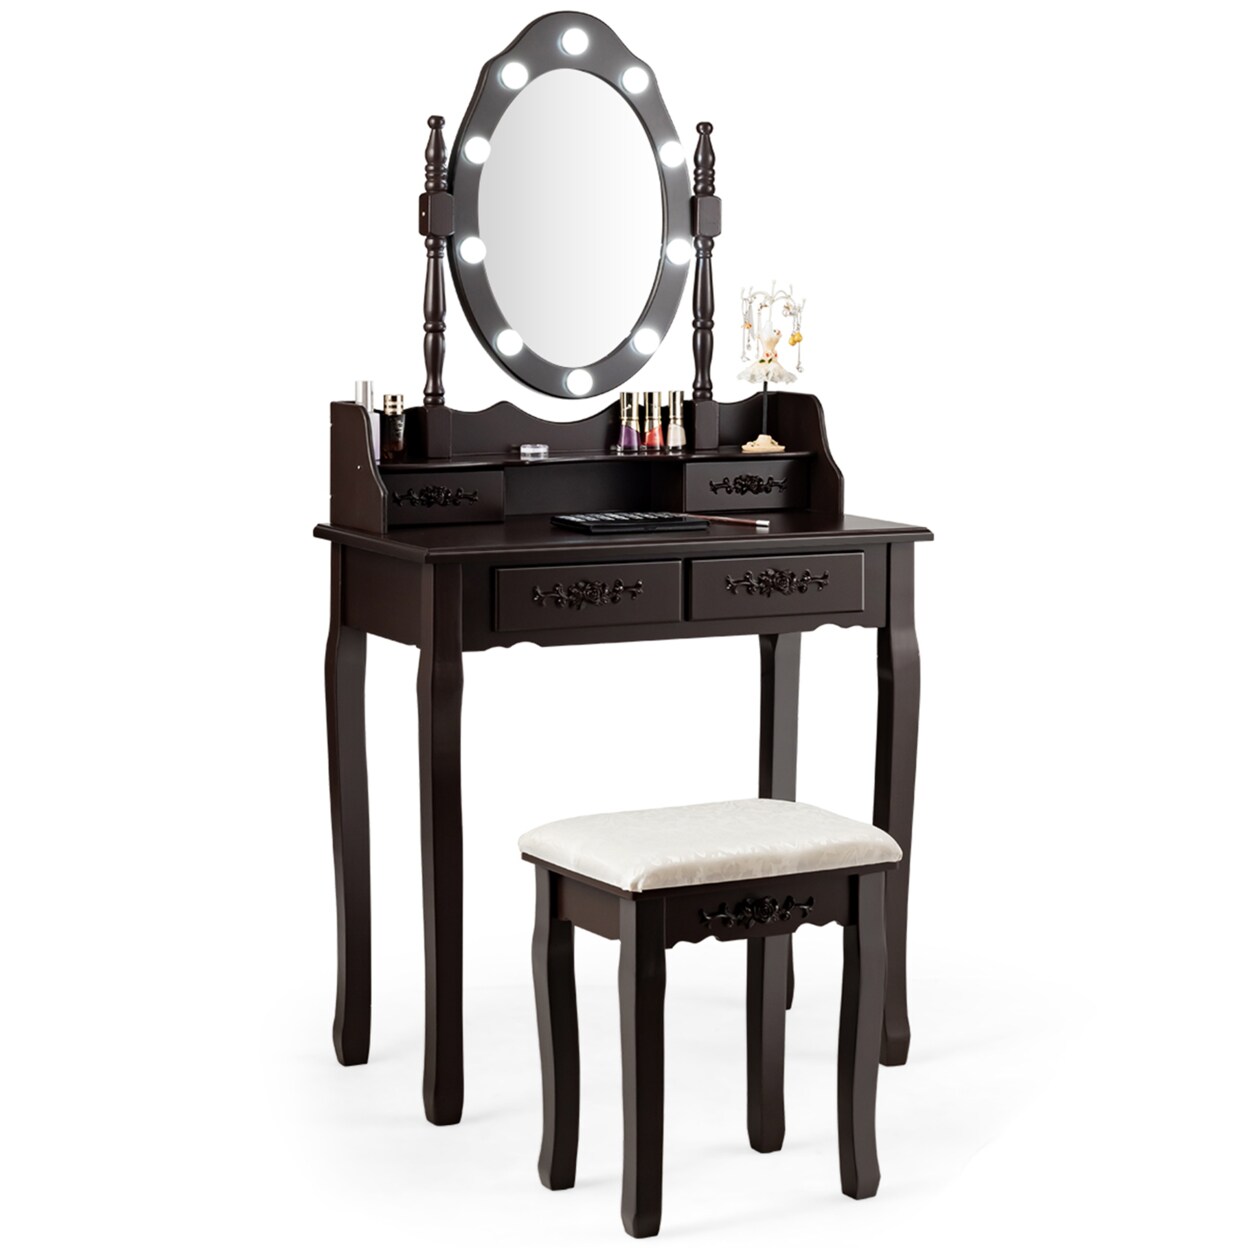 Gymax Makeup Vanity Dressing Table Set w/10 Dimmable Bulbs Cushioned Stool